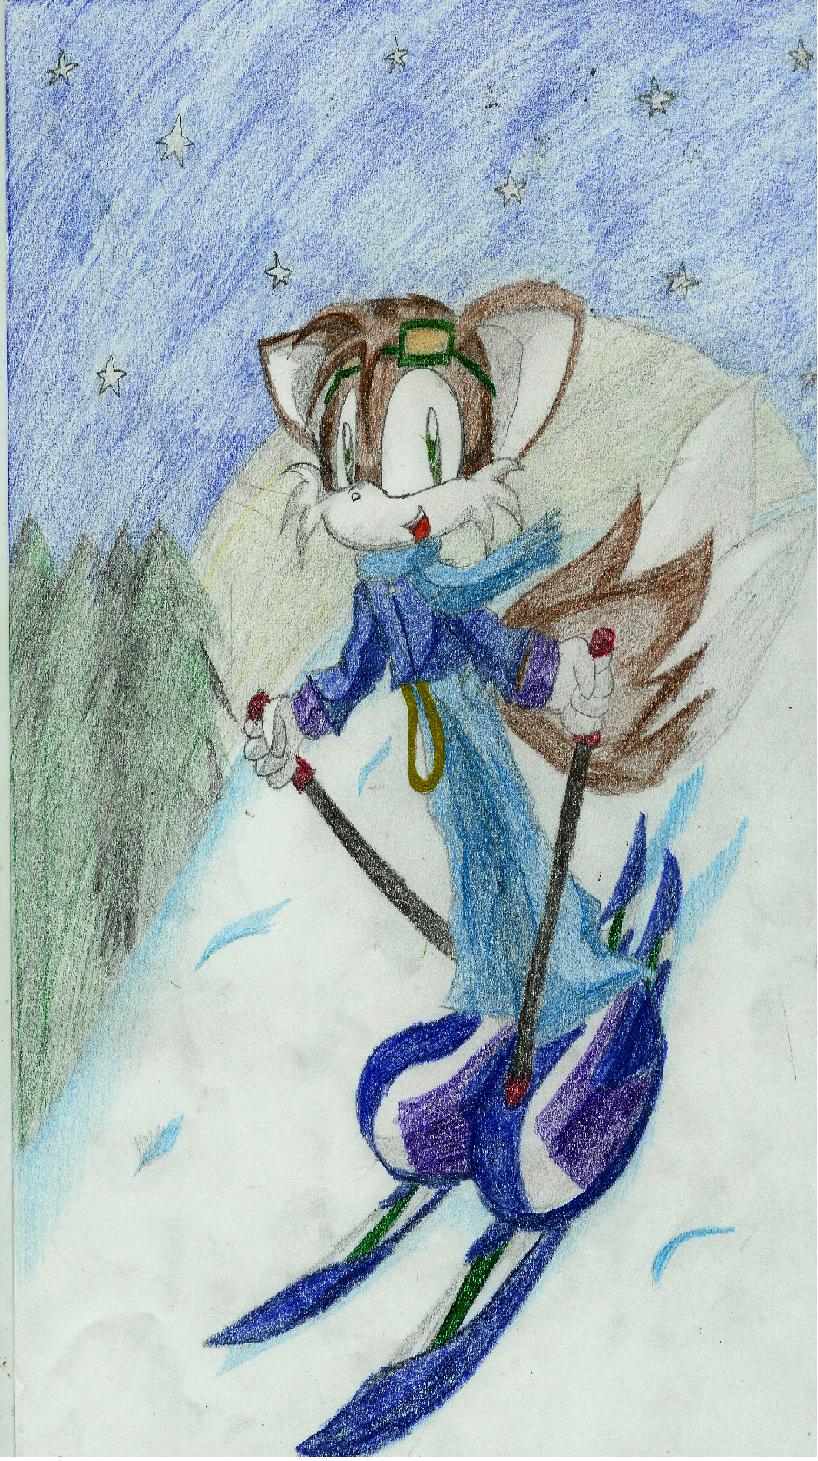 Me Skiing by Knuckles_prower168